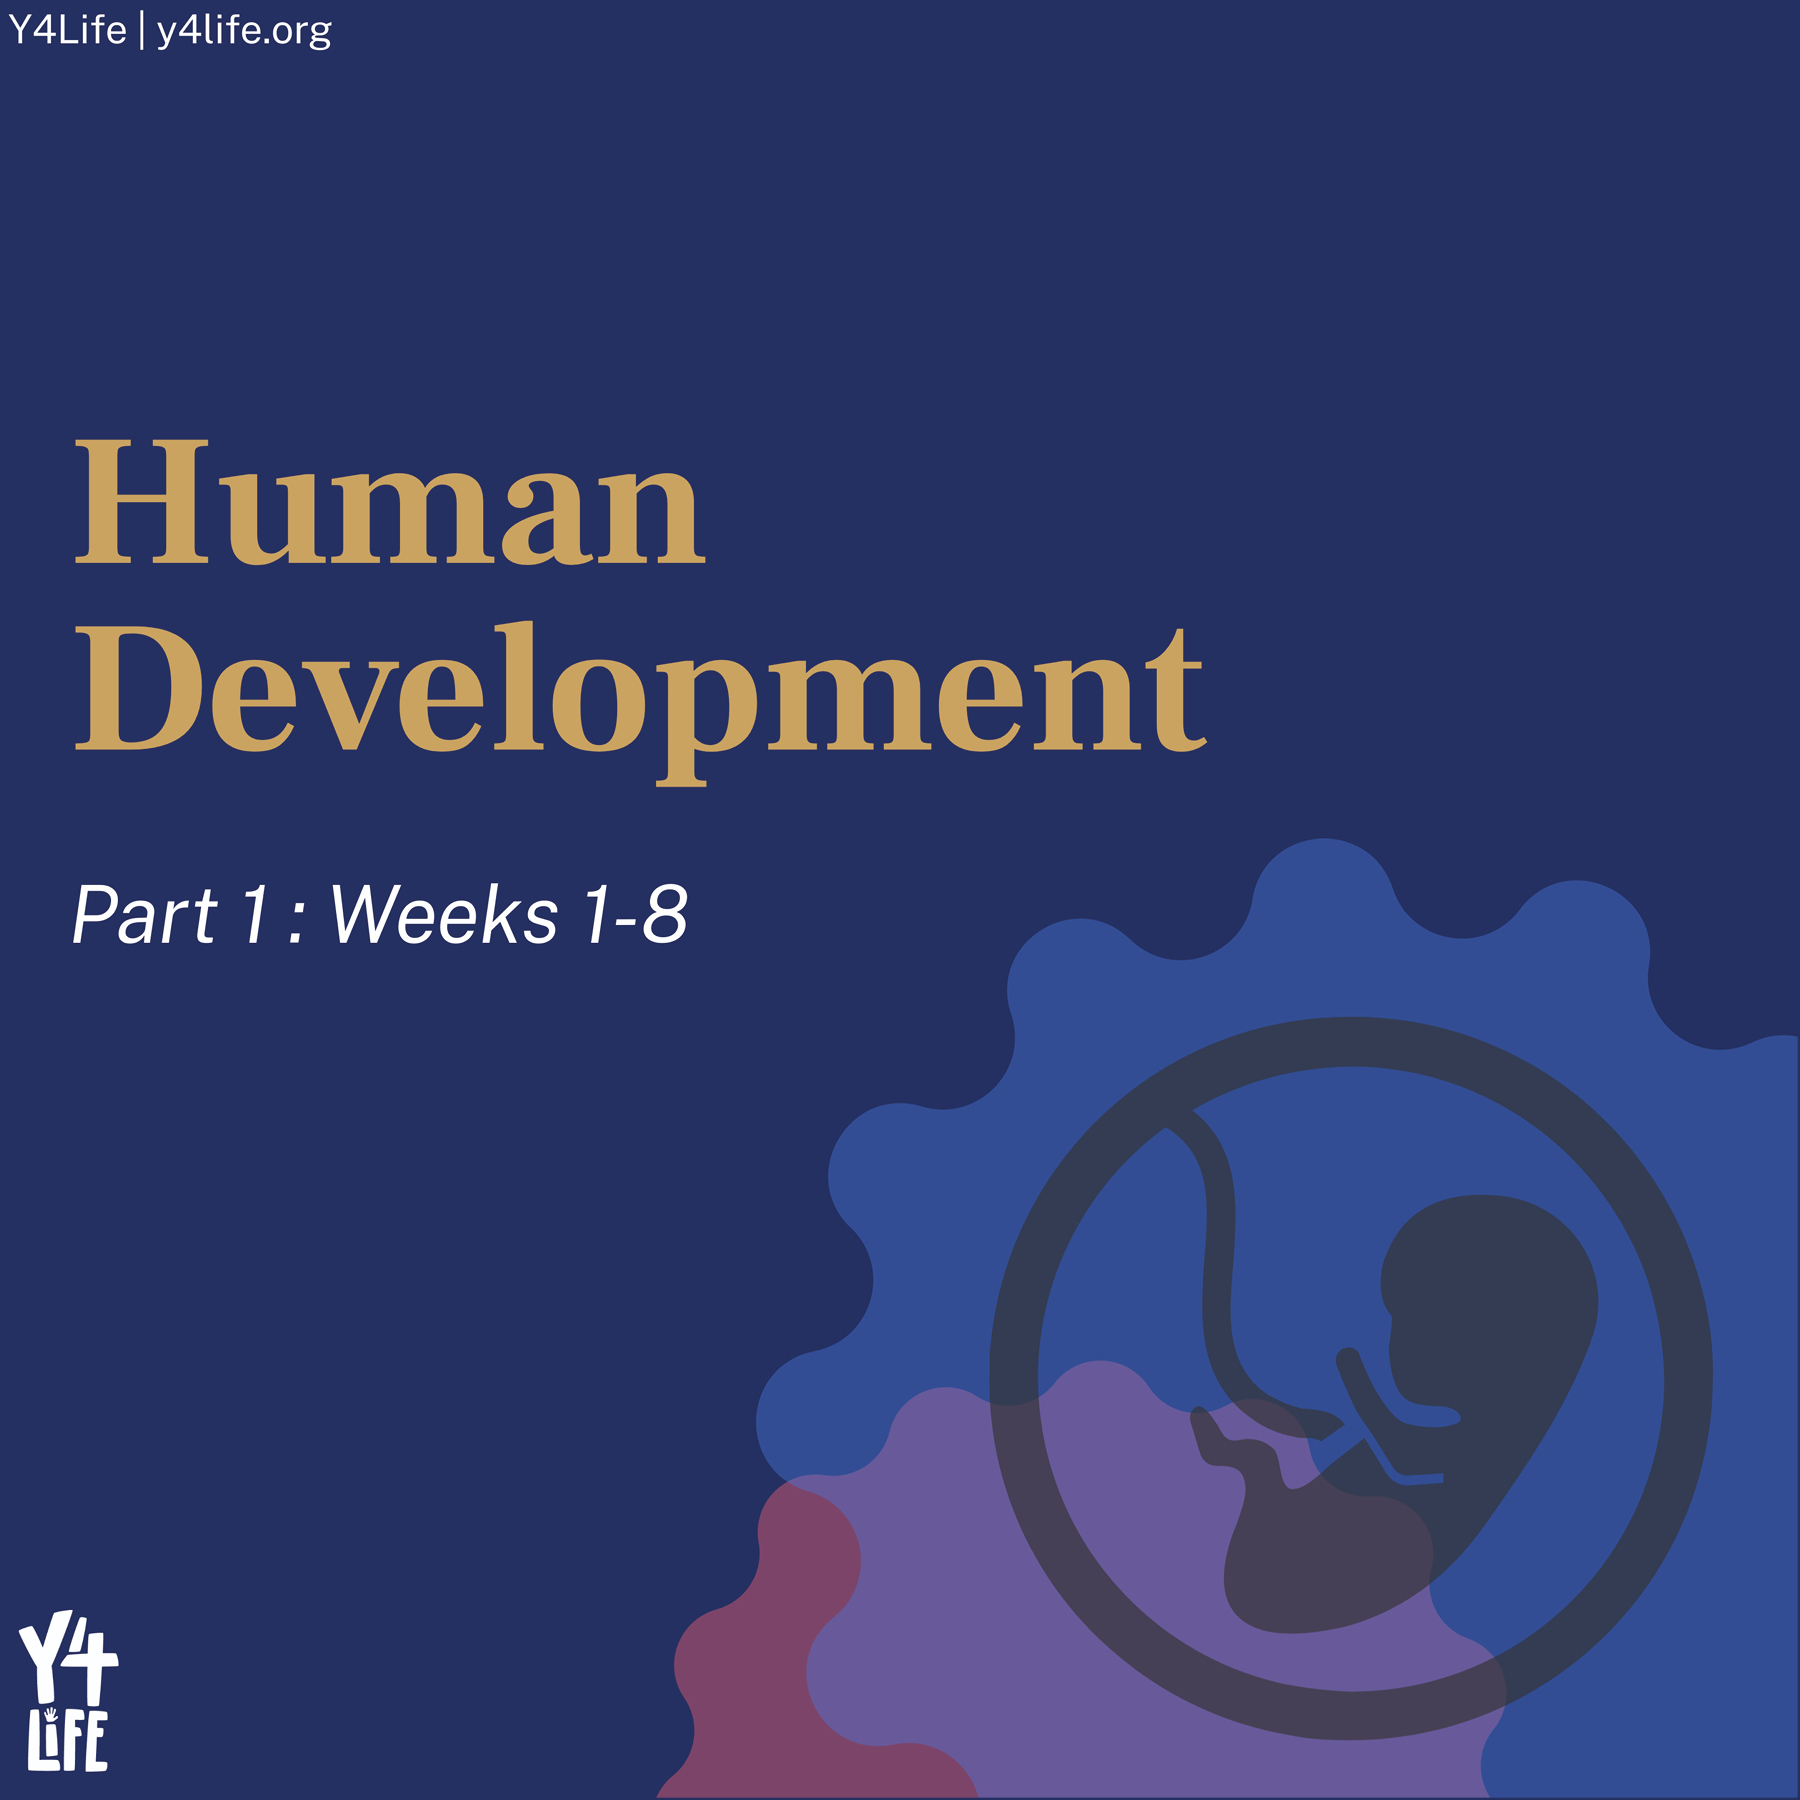 Human Development | Part 1: Weeks 1-8 - A Y4Life Infographic Booklet